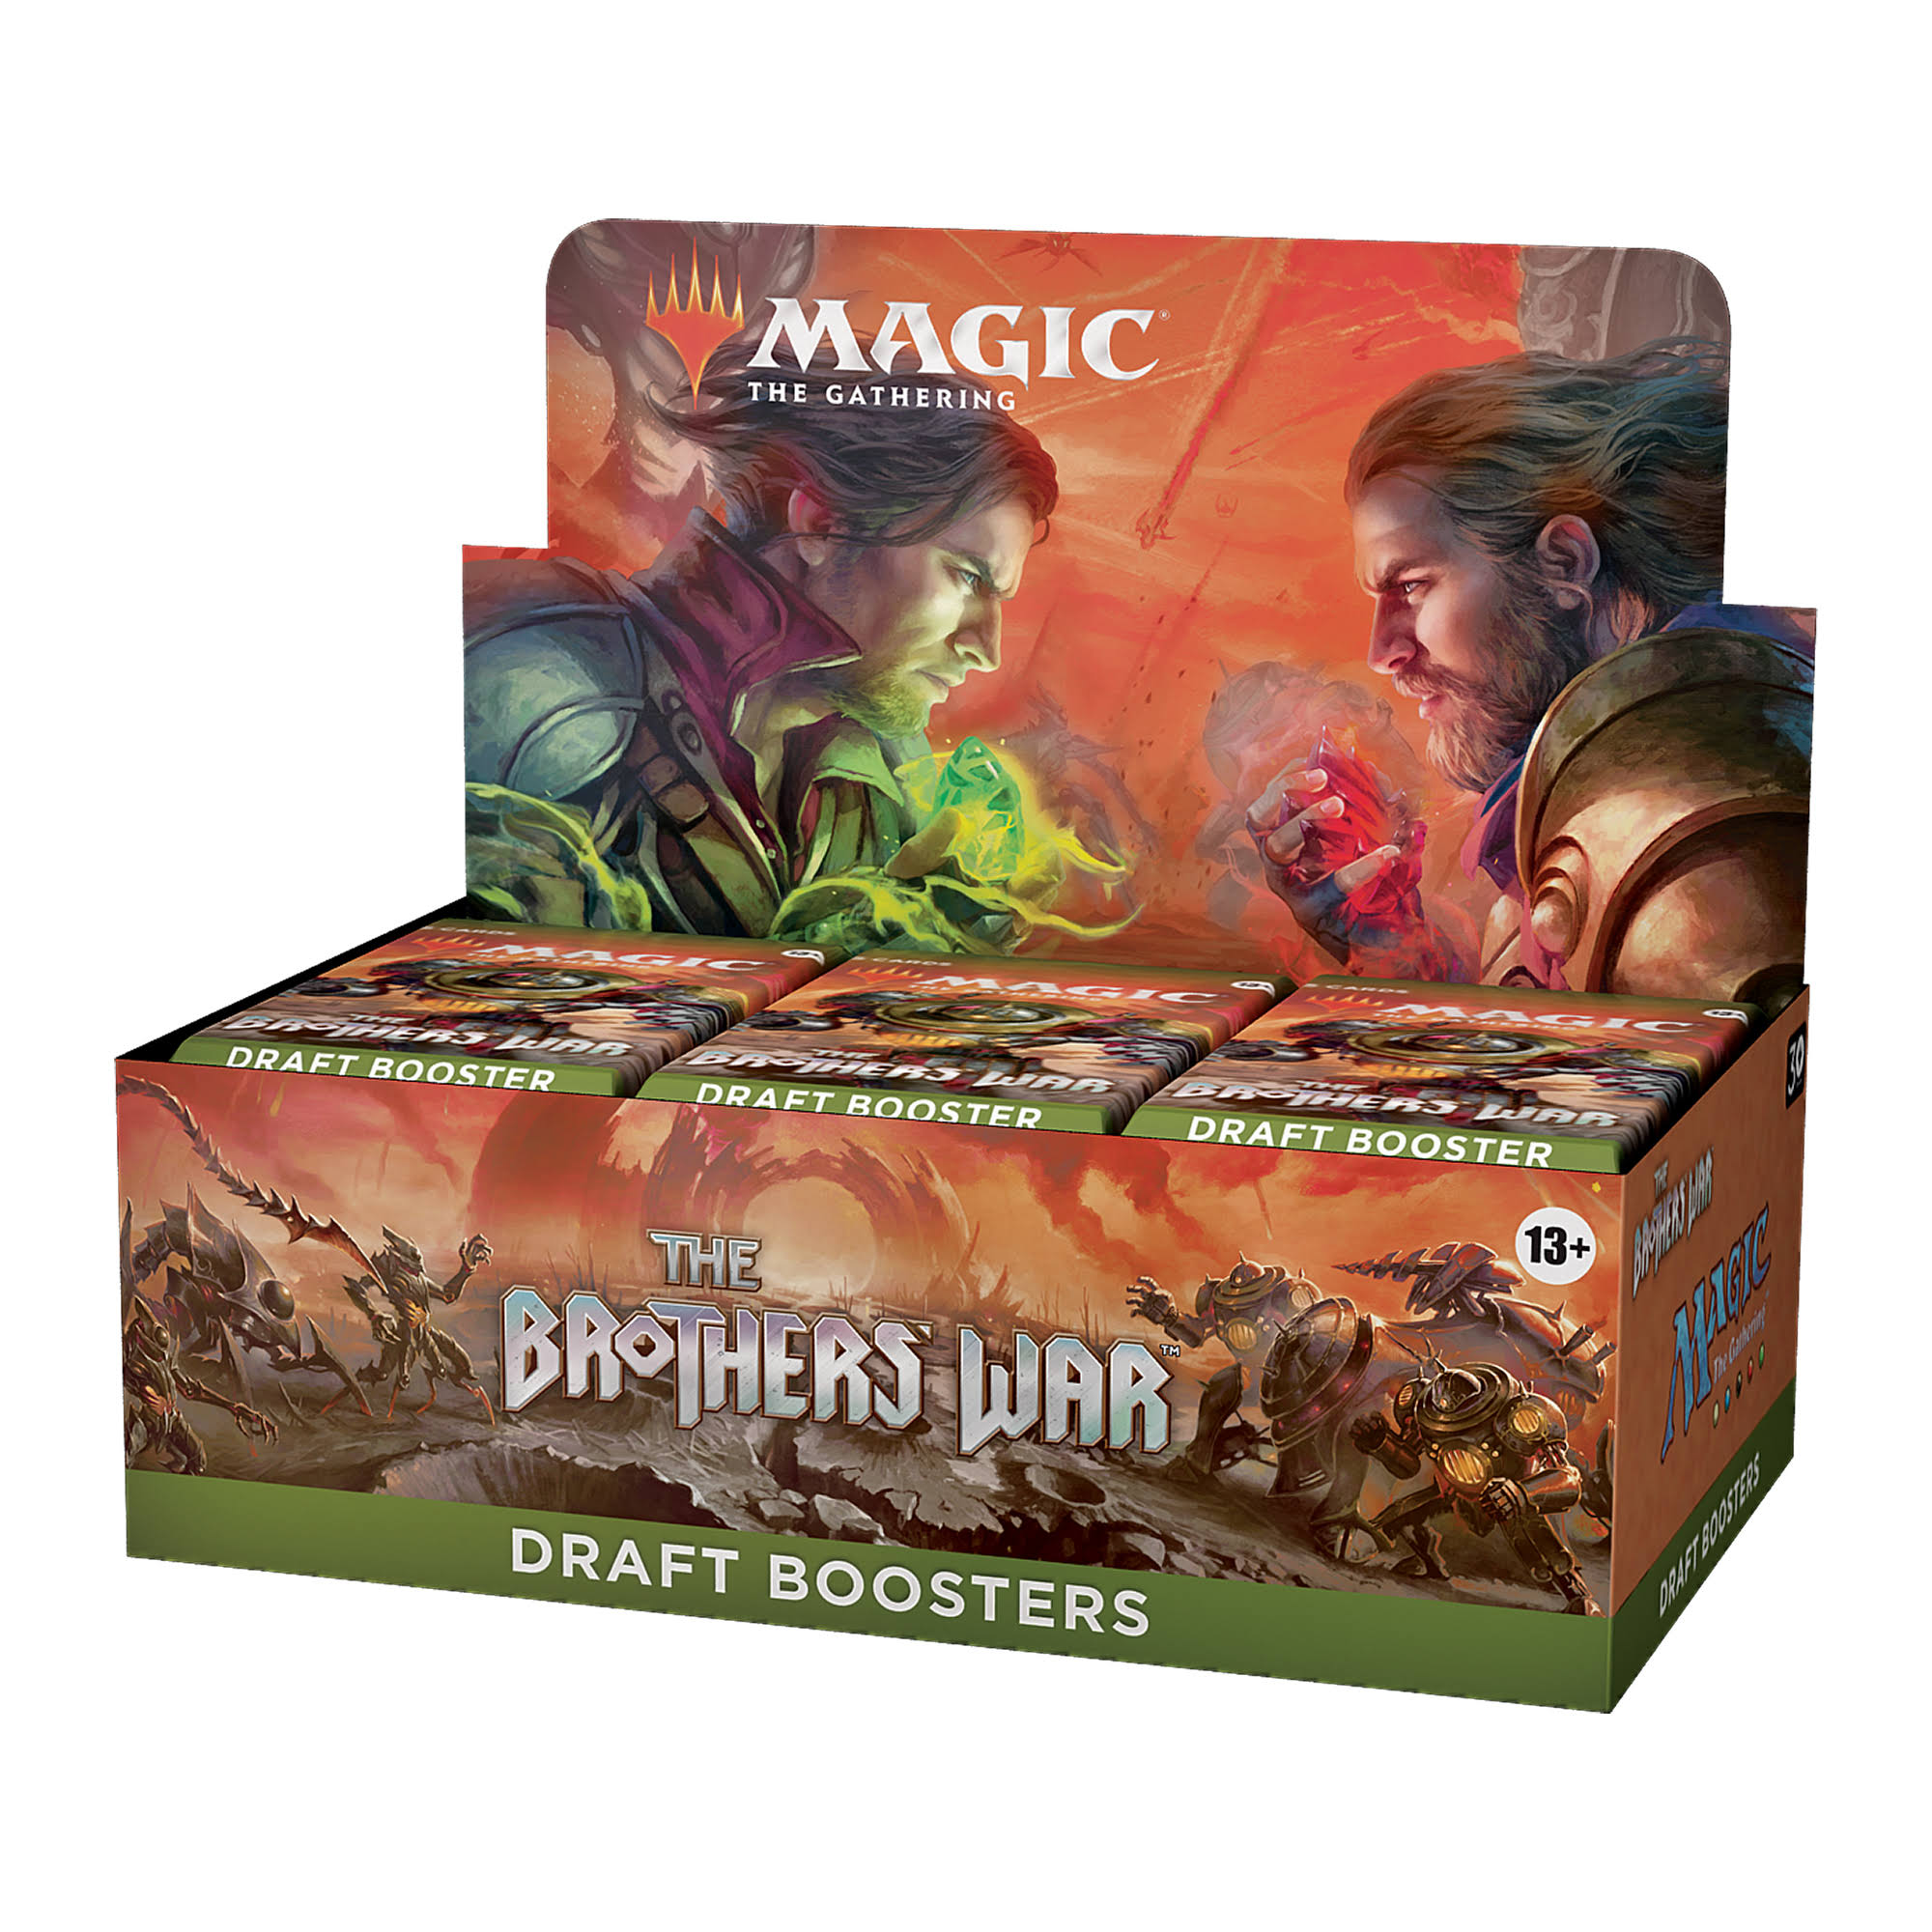 Magic The Gathering - The Brothers' War - Draft Booster Box